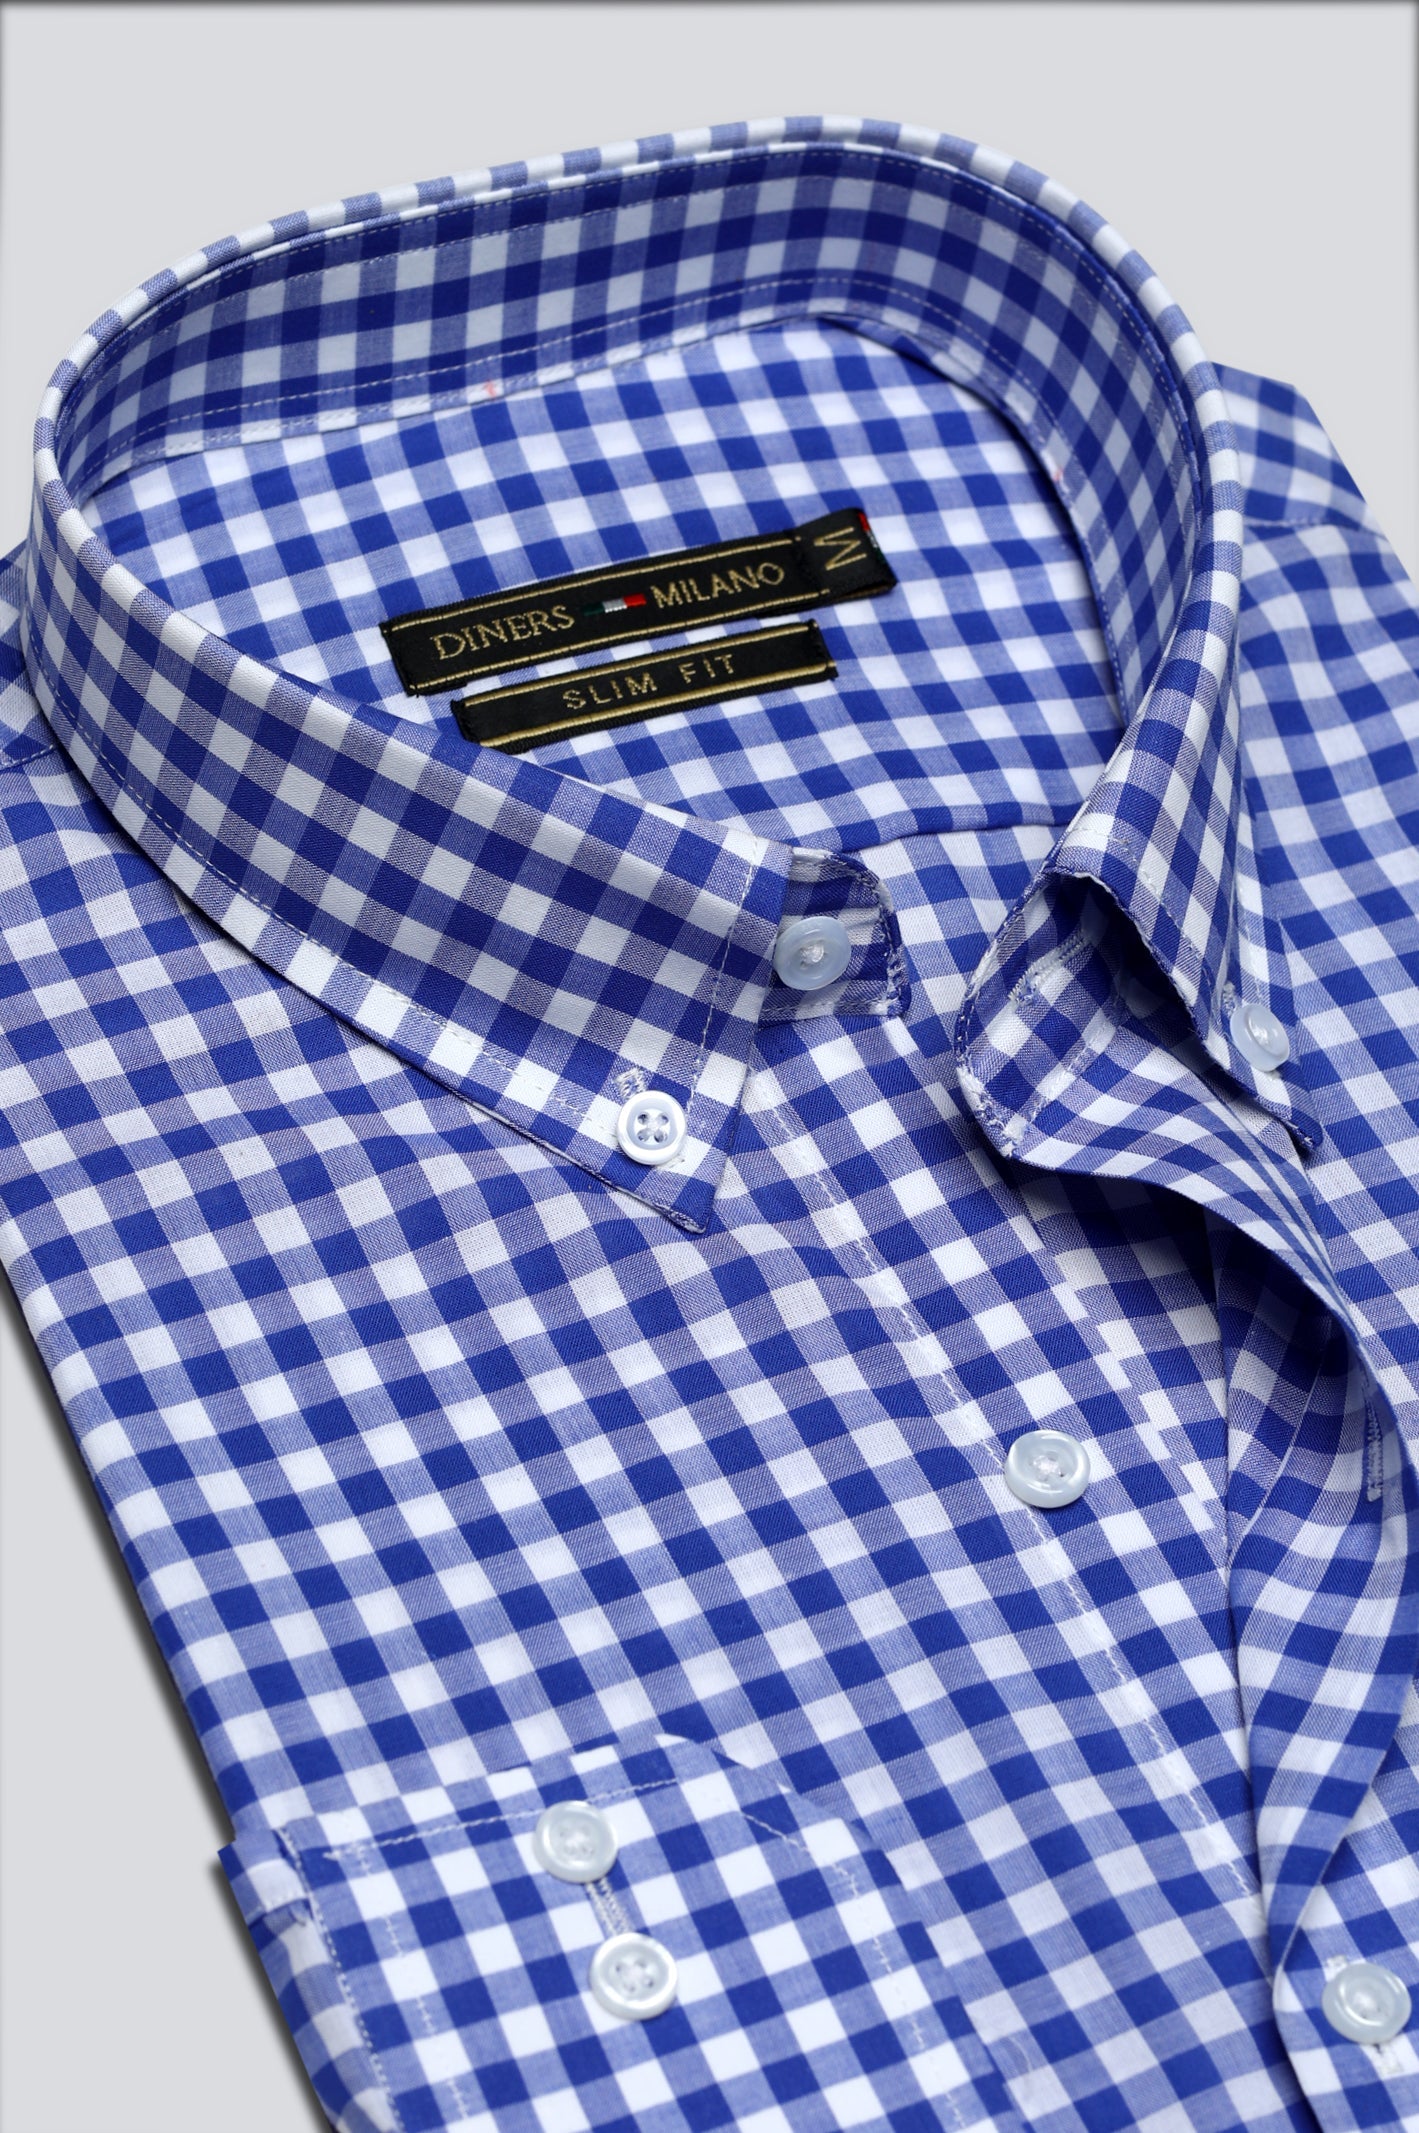 Blue Gingham Check Casual Milano Shirt for Men - Diners